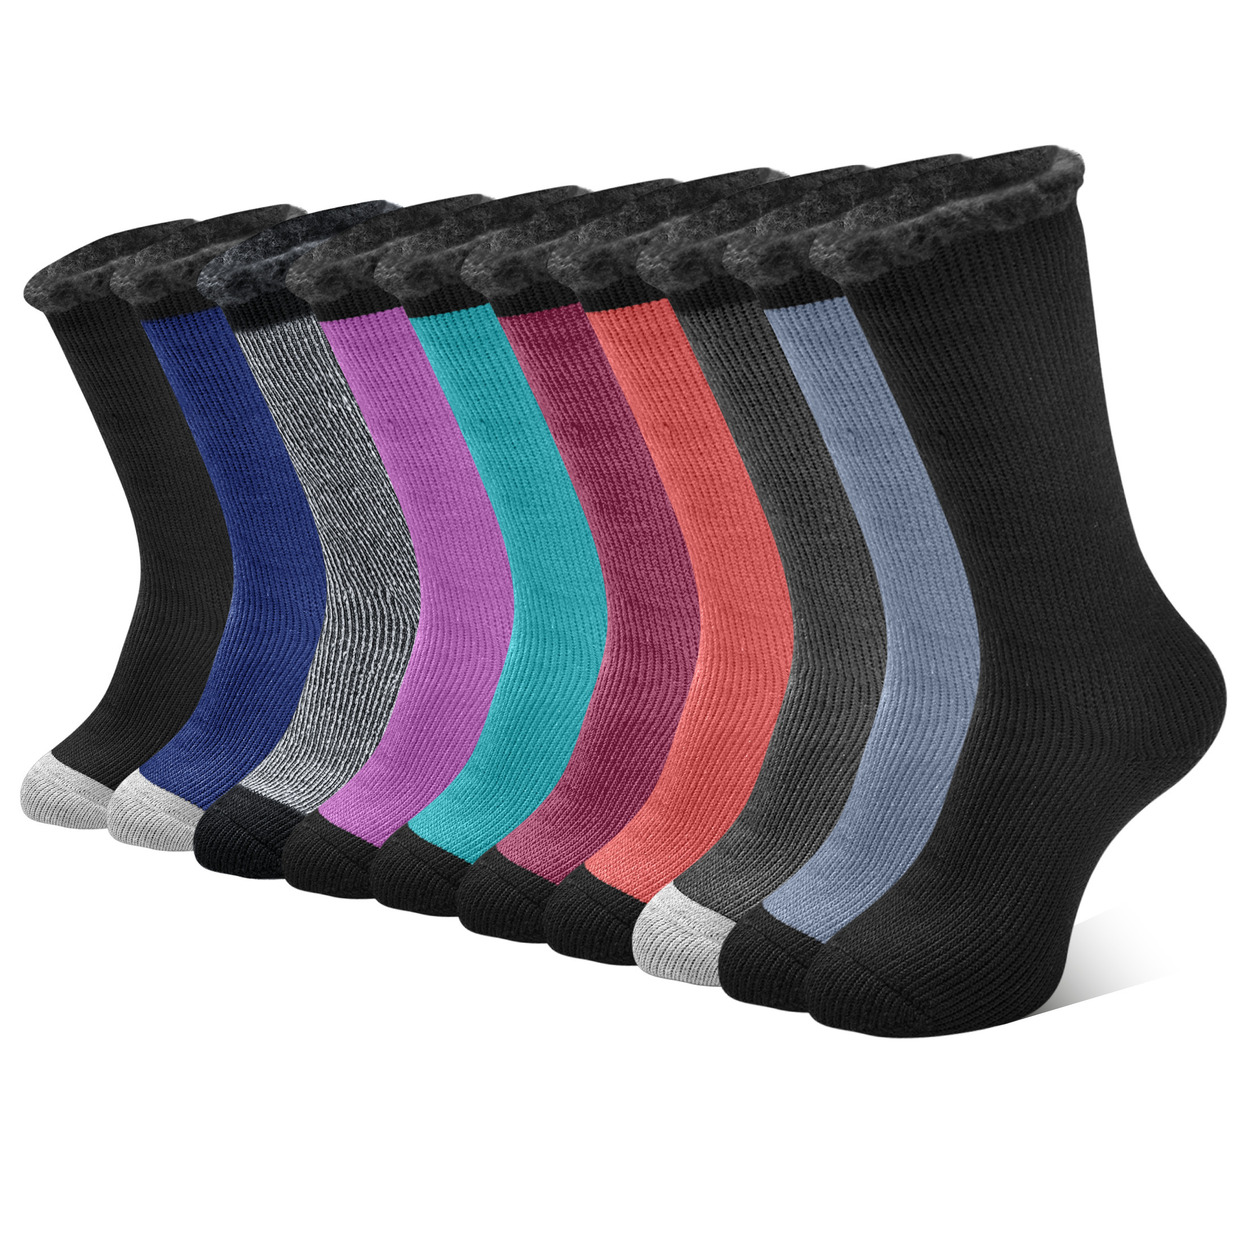 3-Pairs: Men's Thermal-Insulated Brushed Lined Warm Heated Winter Socks For Cold Weather